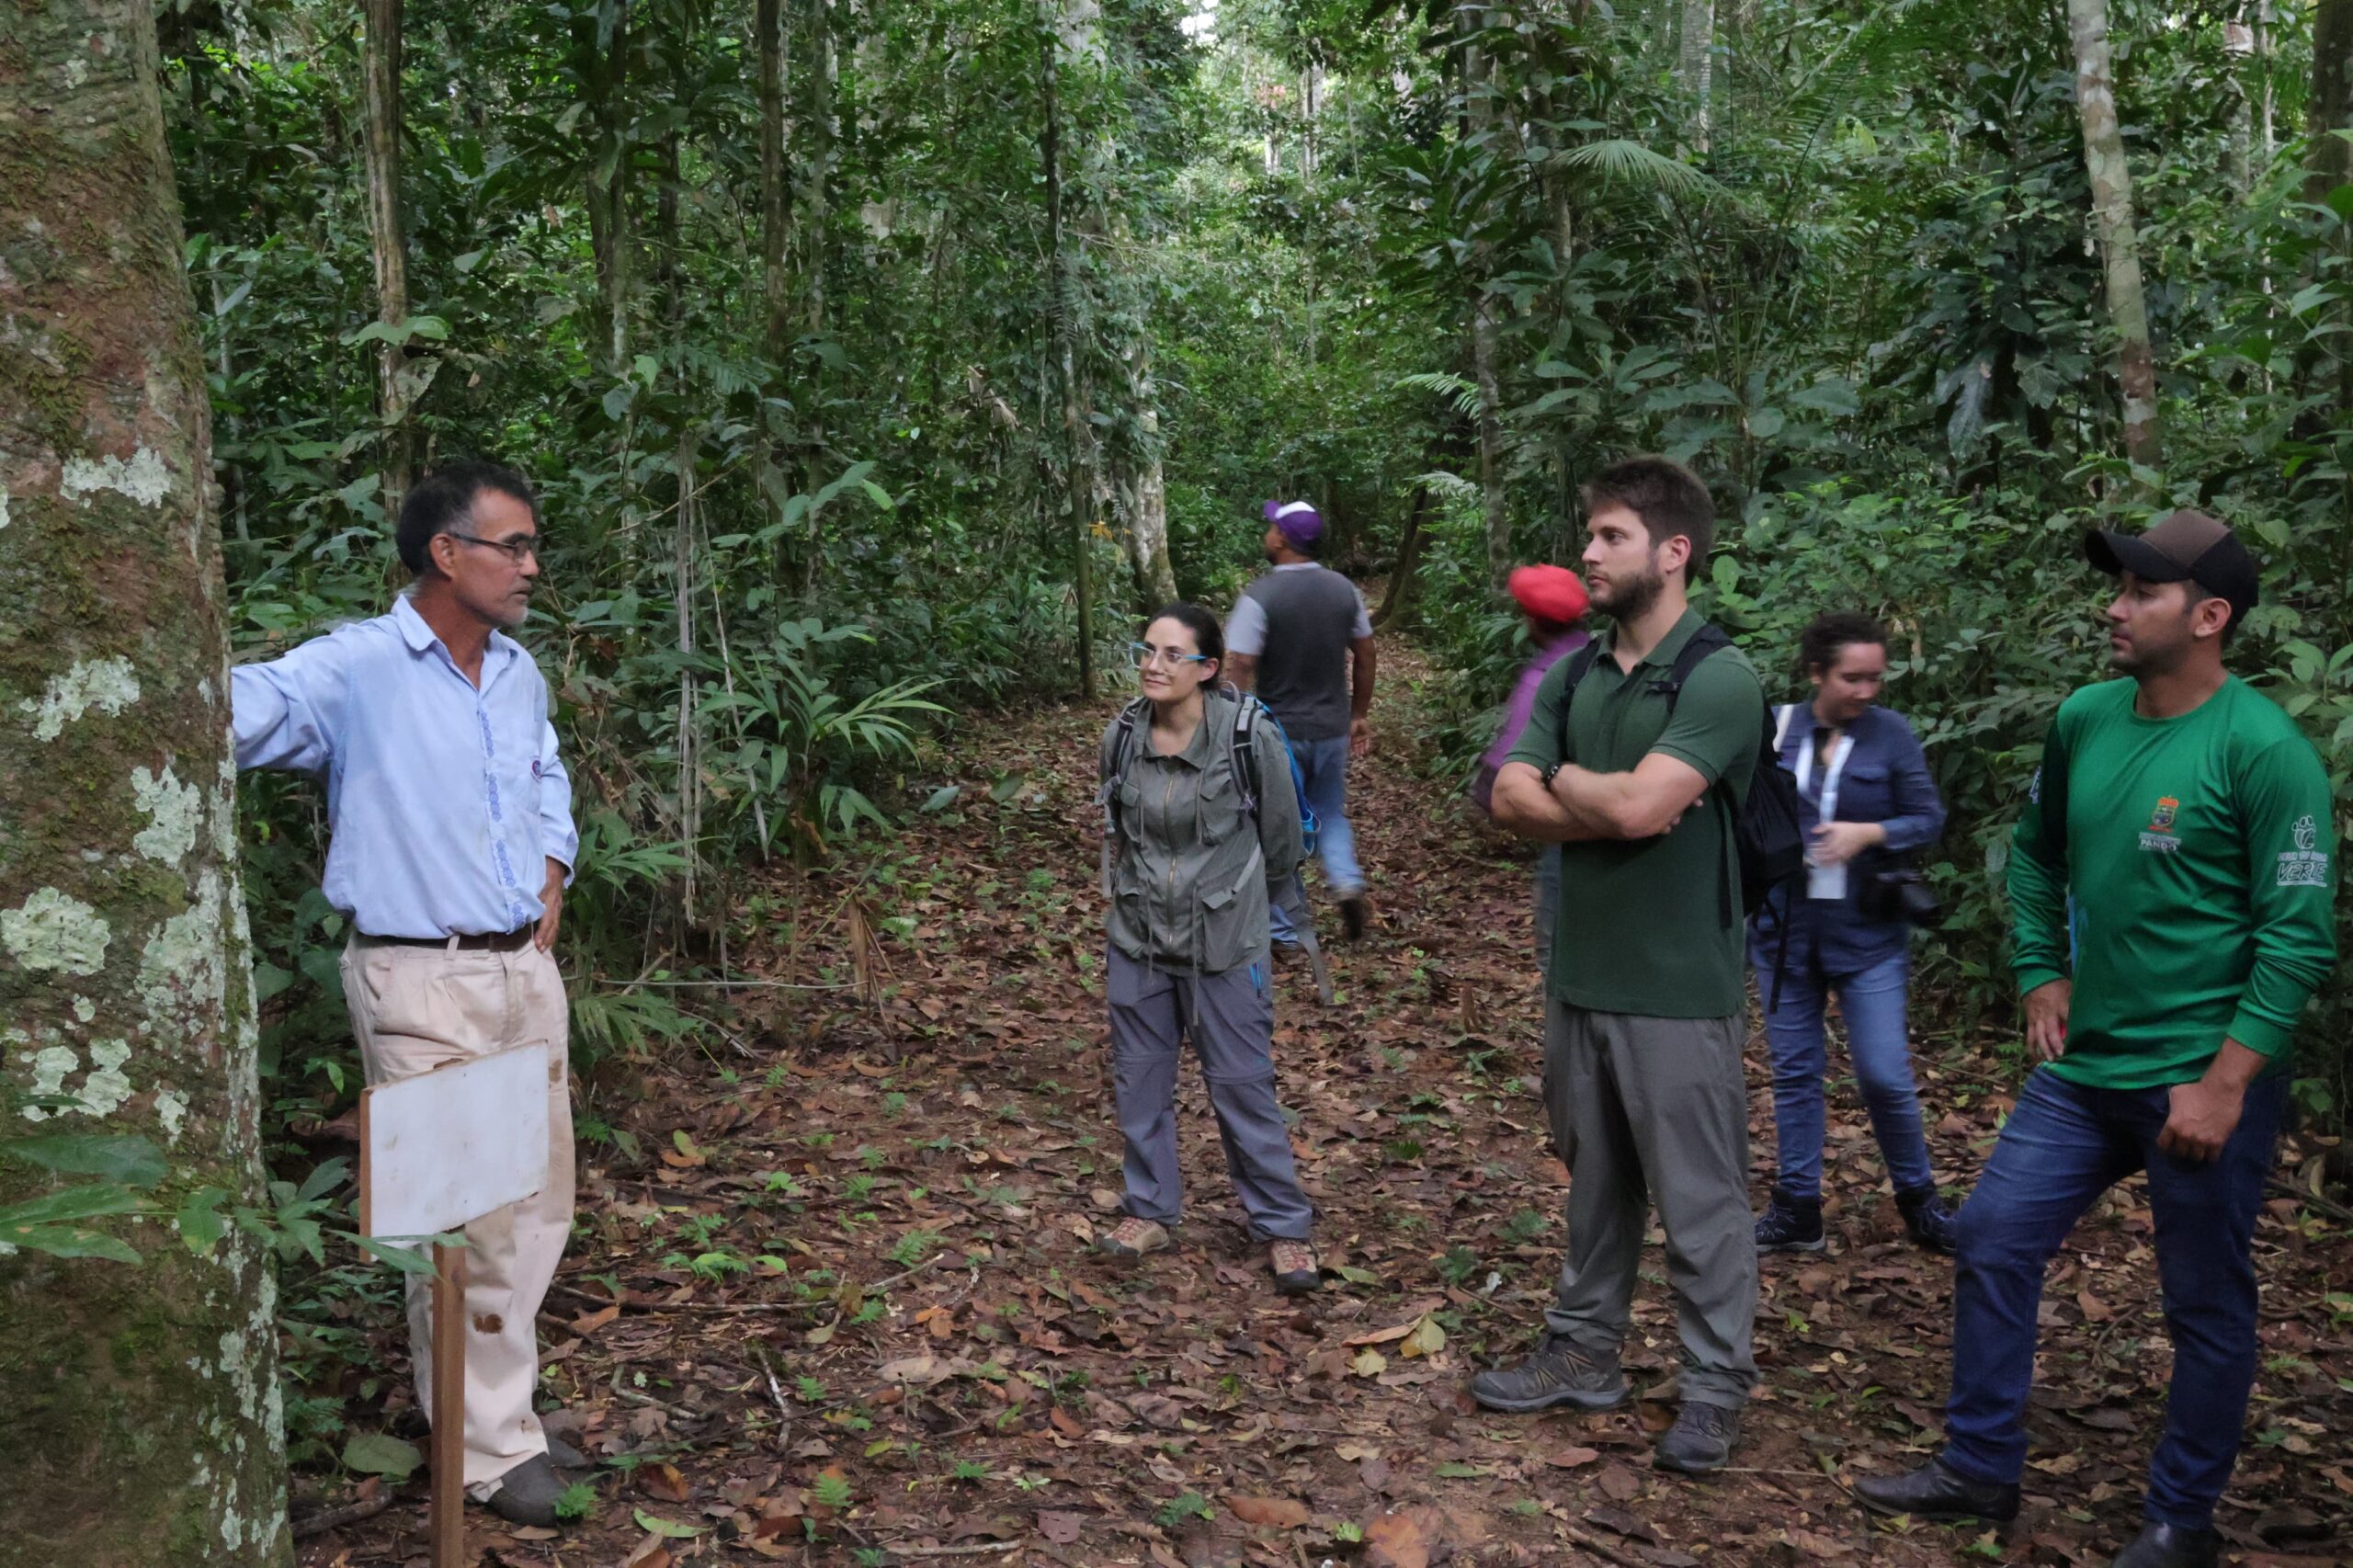 Dom Manuel explains the different economic cycles the region went through next to a rubber tree. Photo by the ACEAA.